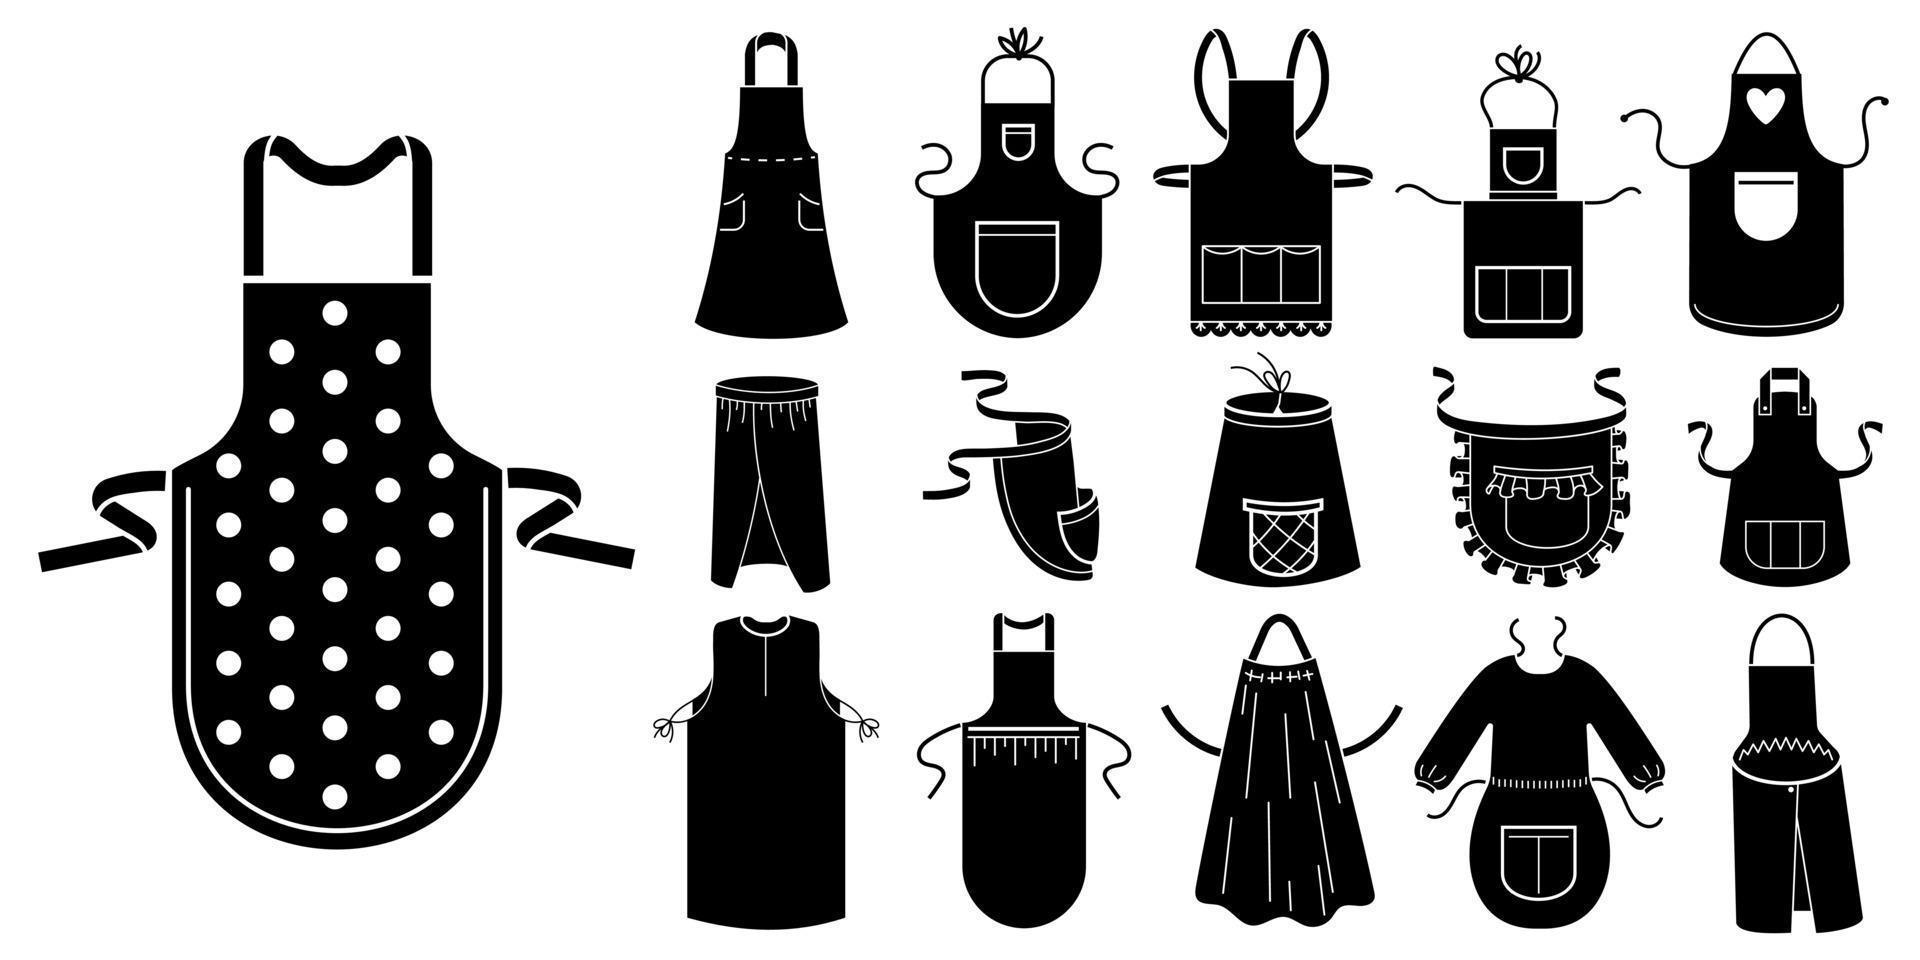 Apron icons set, simple style vector